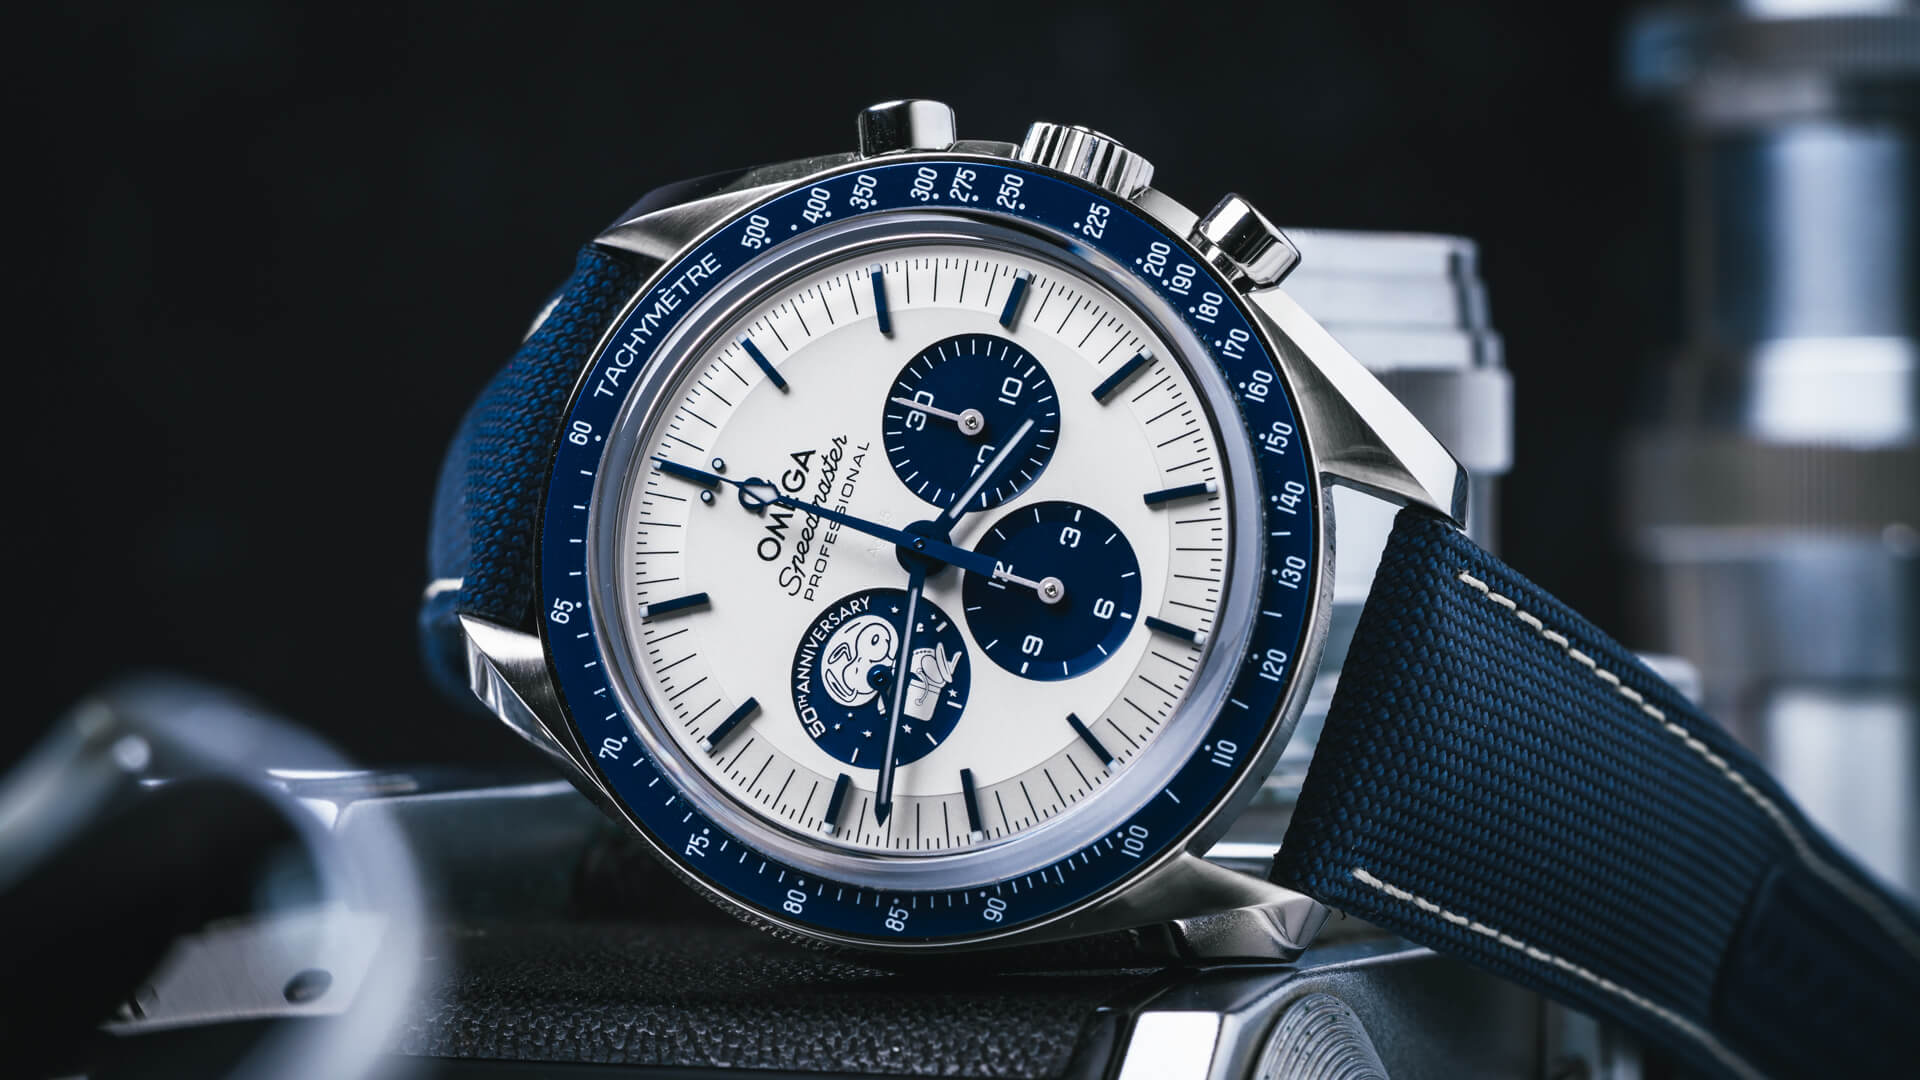 Review: 5 Things You Should Know Before You Buy The Omega Speedmaster  Silver Snoopy